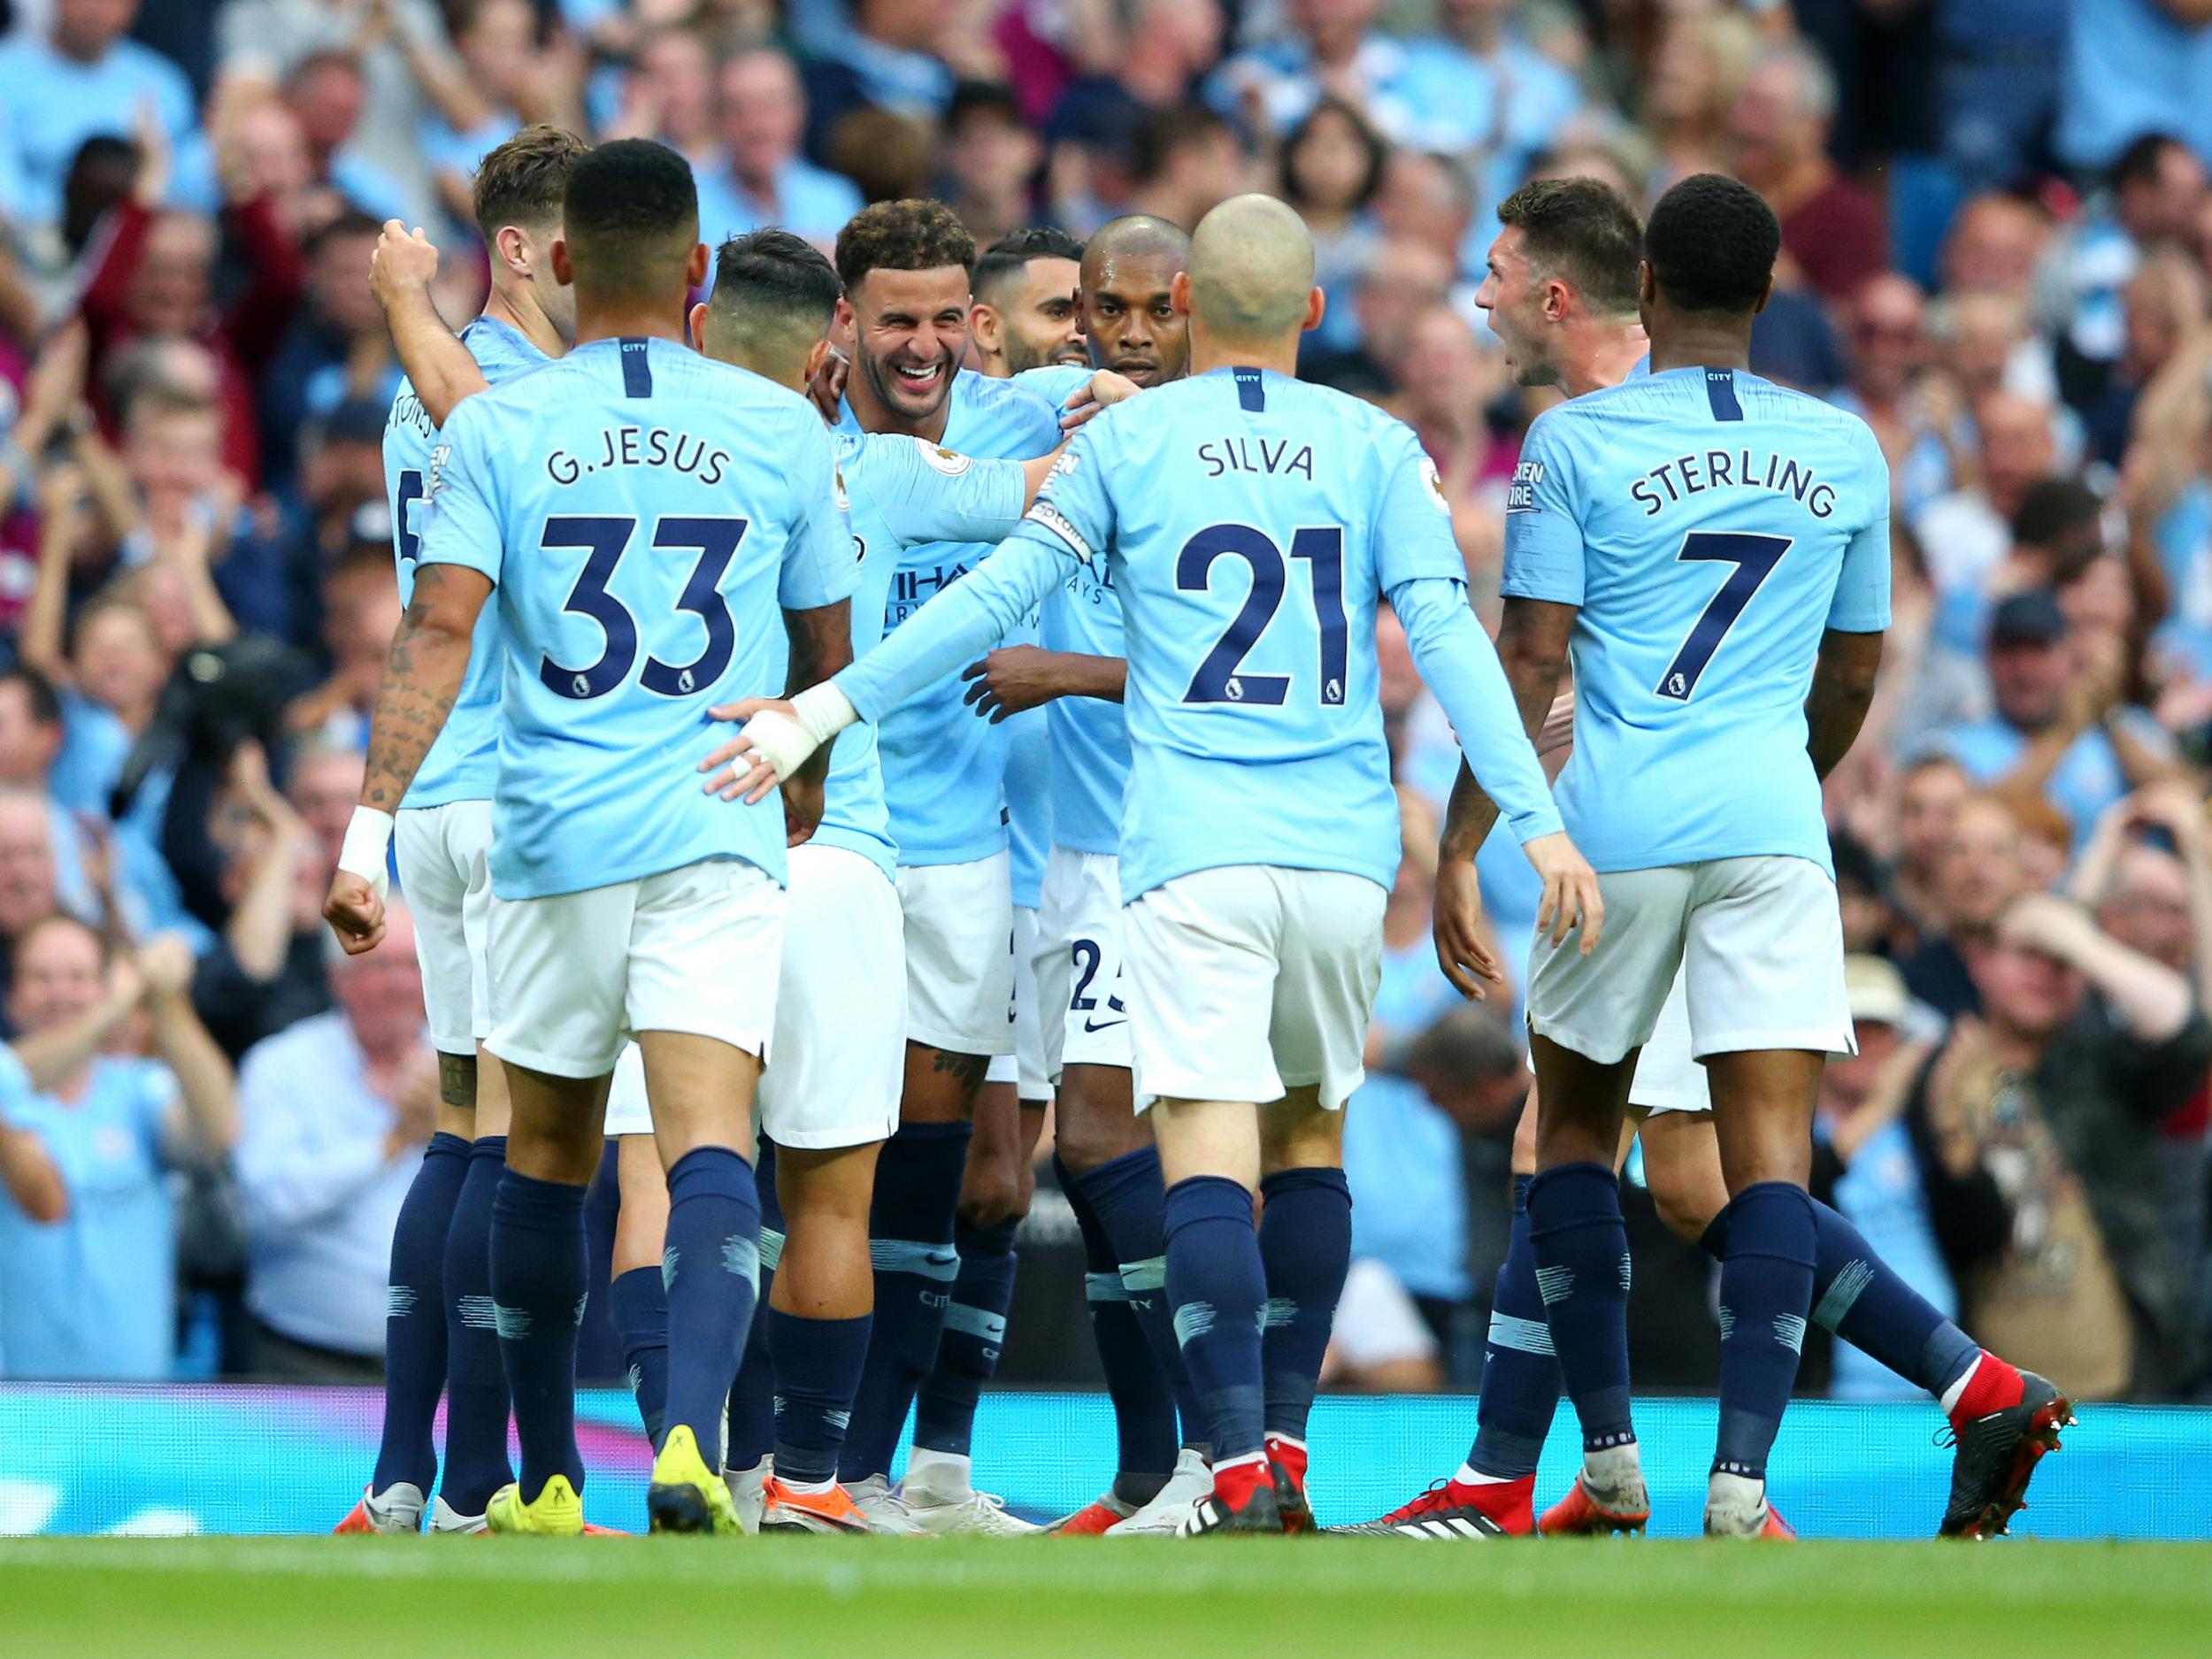 Walker's fabulous strike made the difference for City